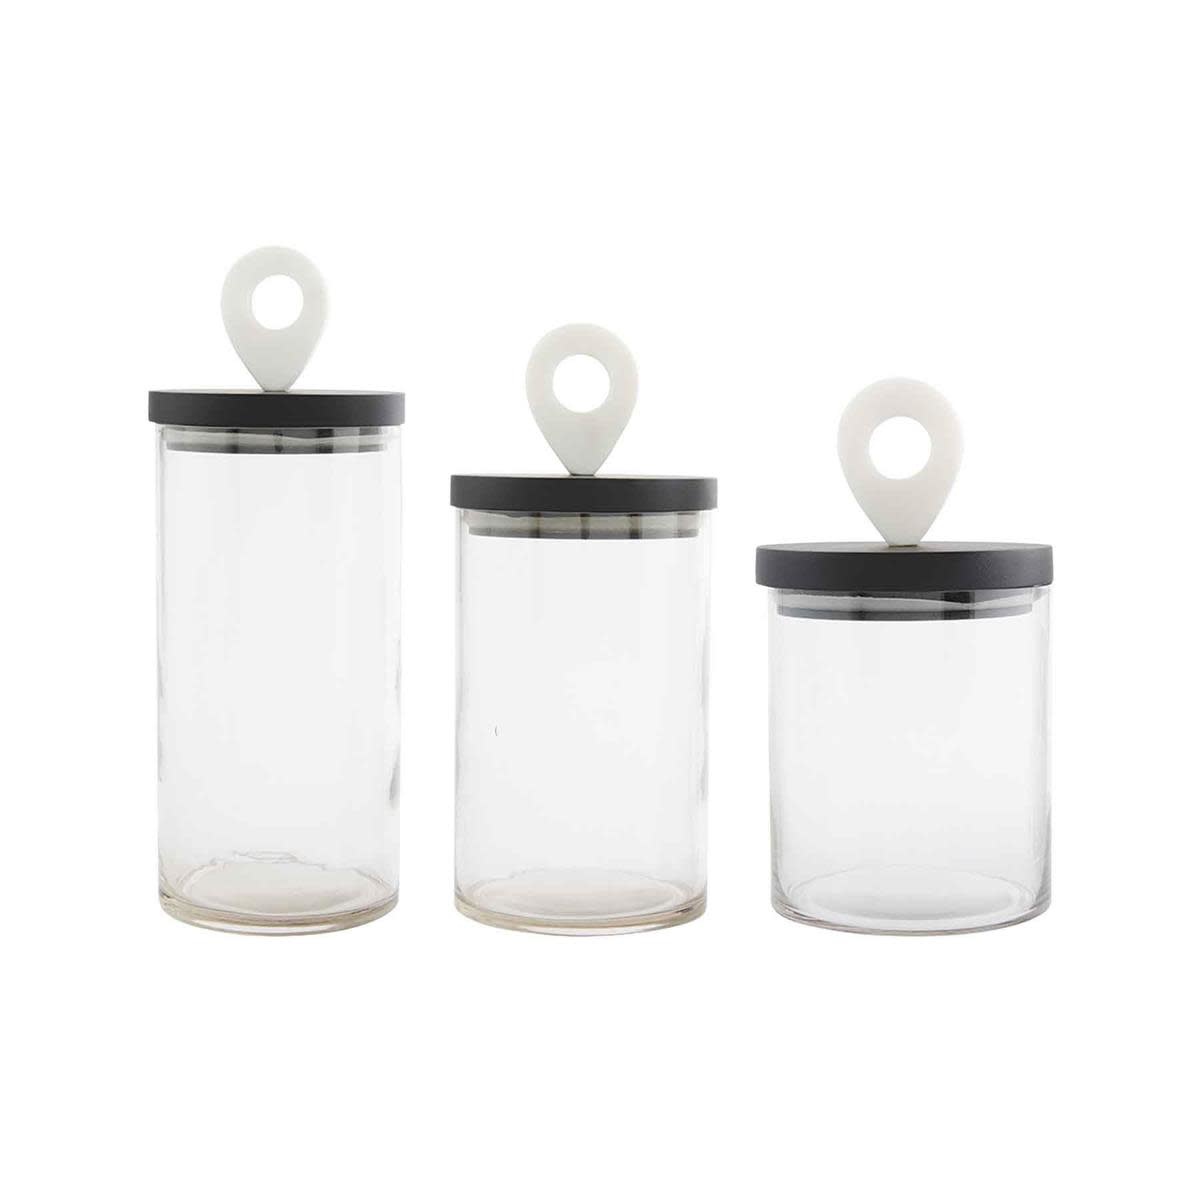 MUD PIE BLACK & WHITE GLASS CANISTER SET